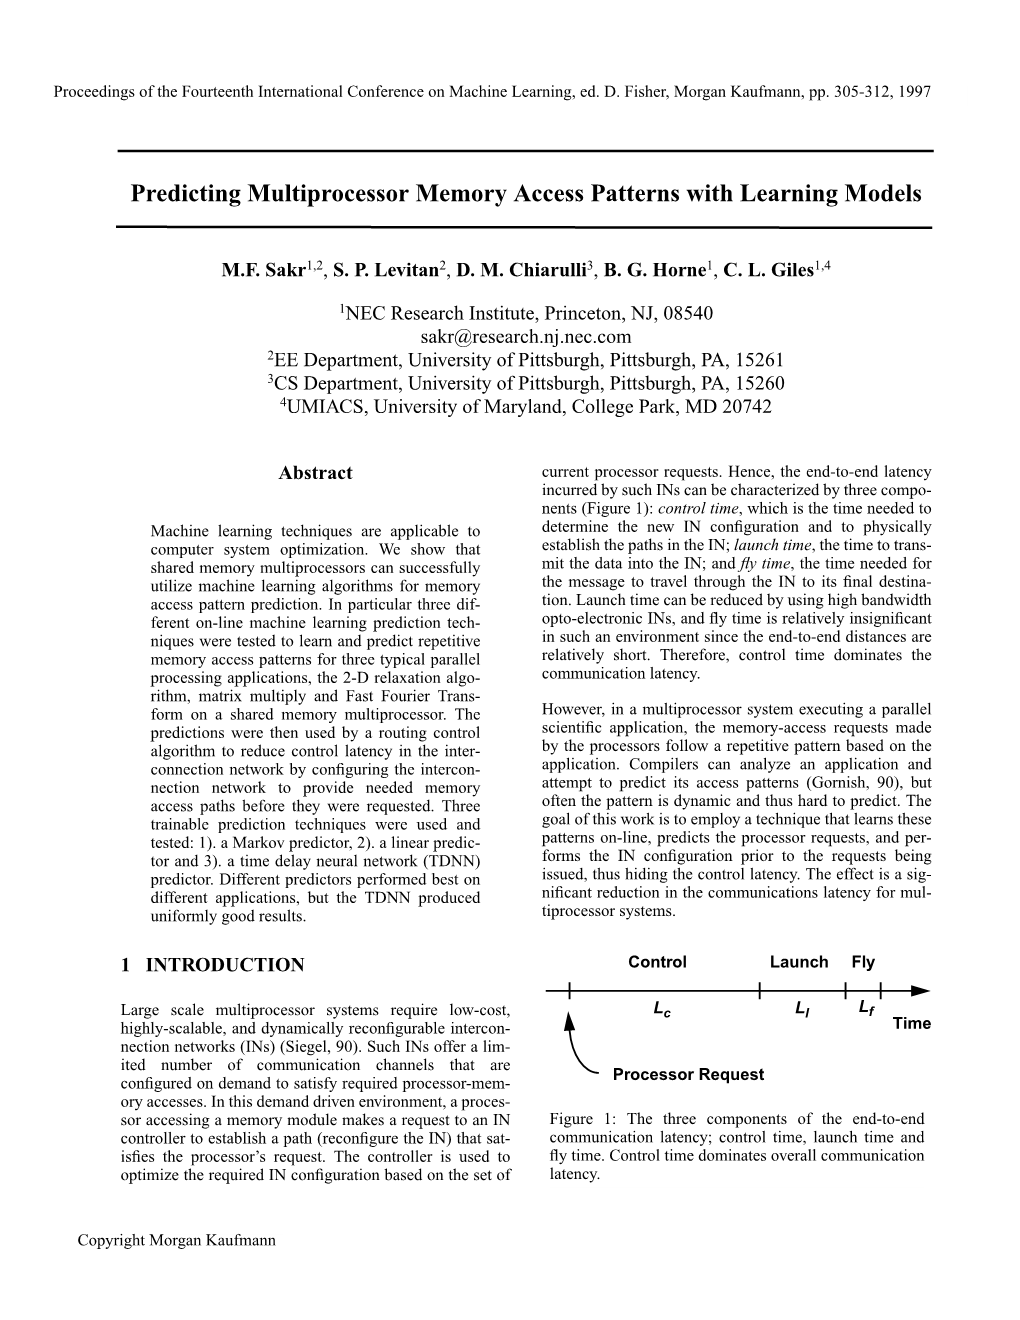 Predicting Multiprocessor Memory Access Patterns with Learning Models